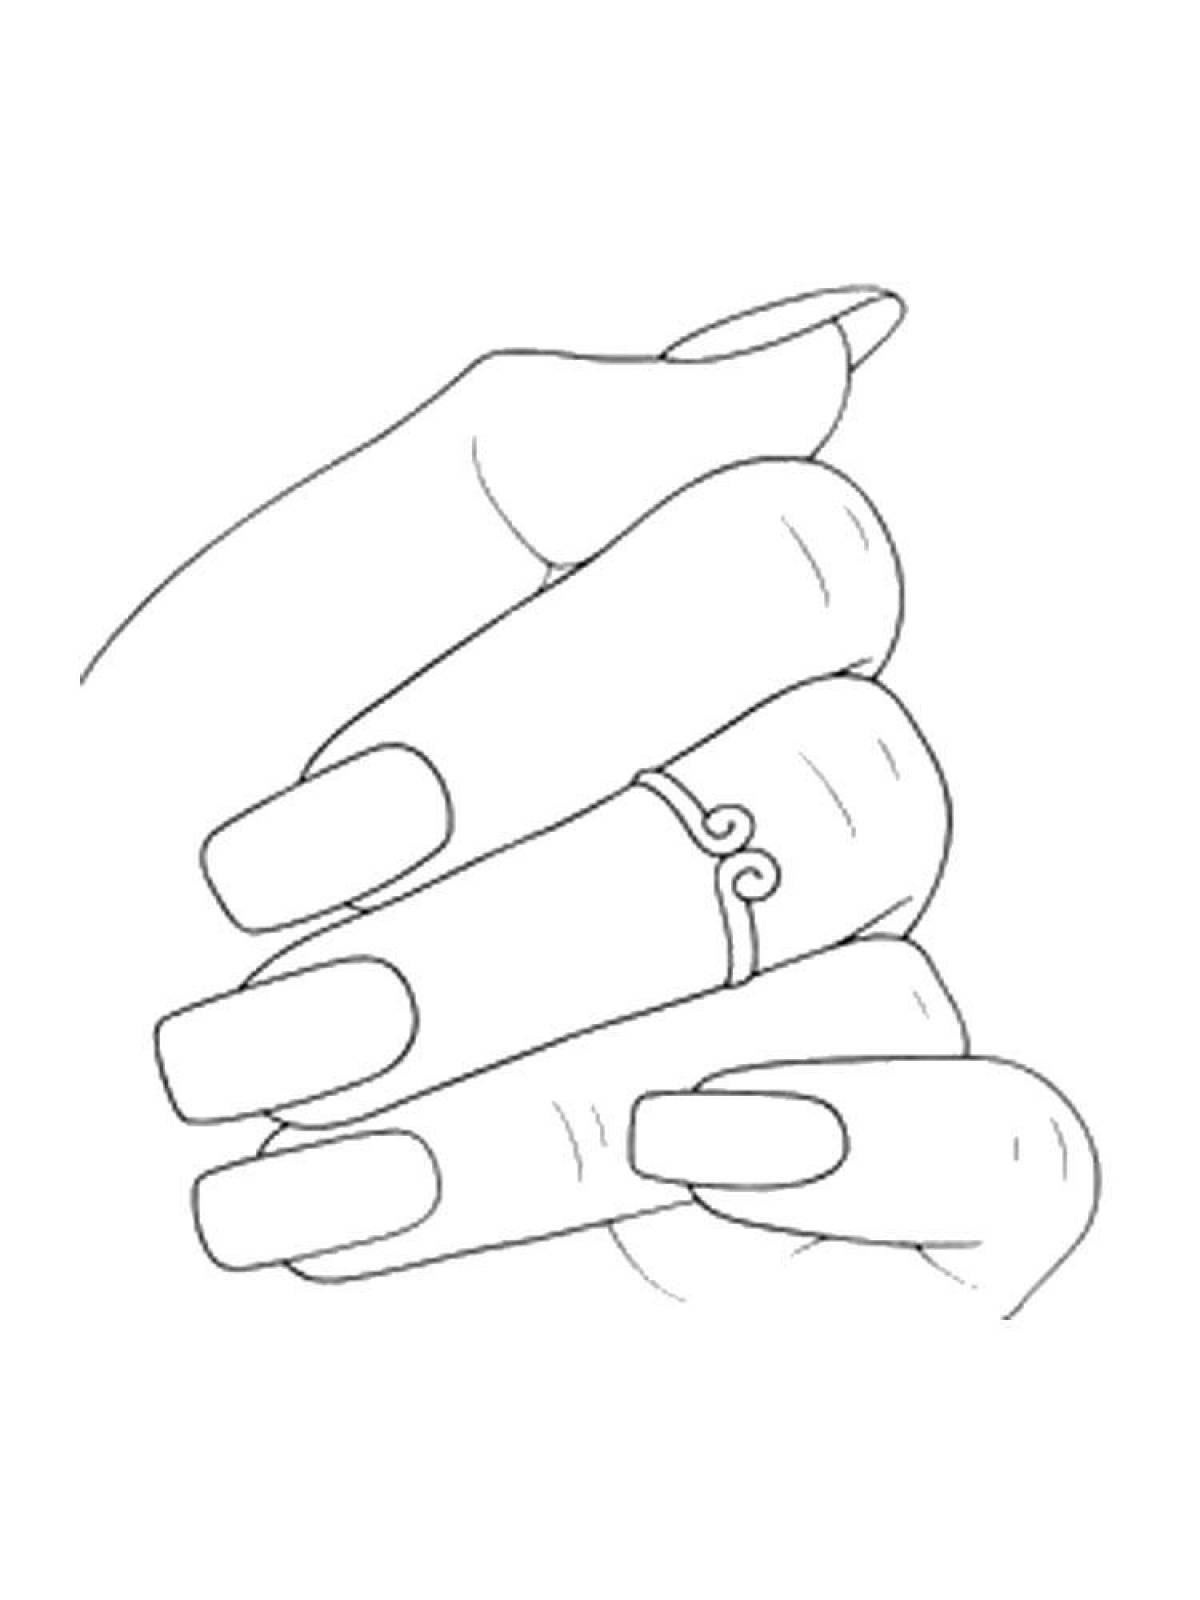 Gourmet manicure coloring page